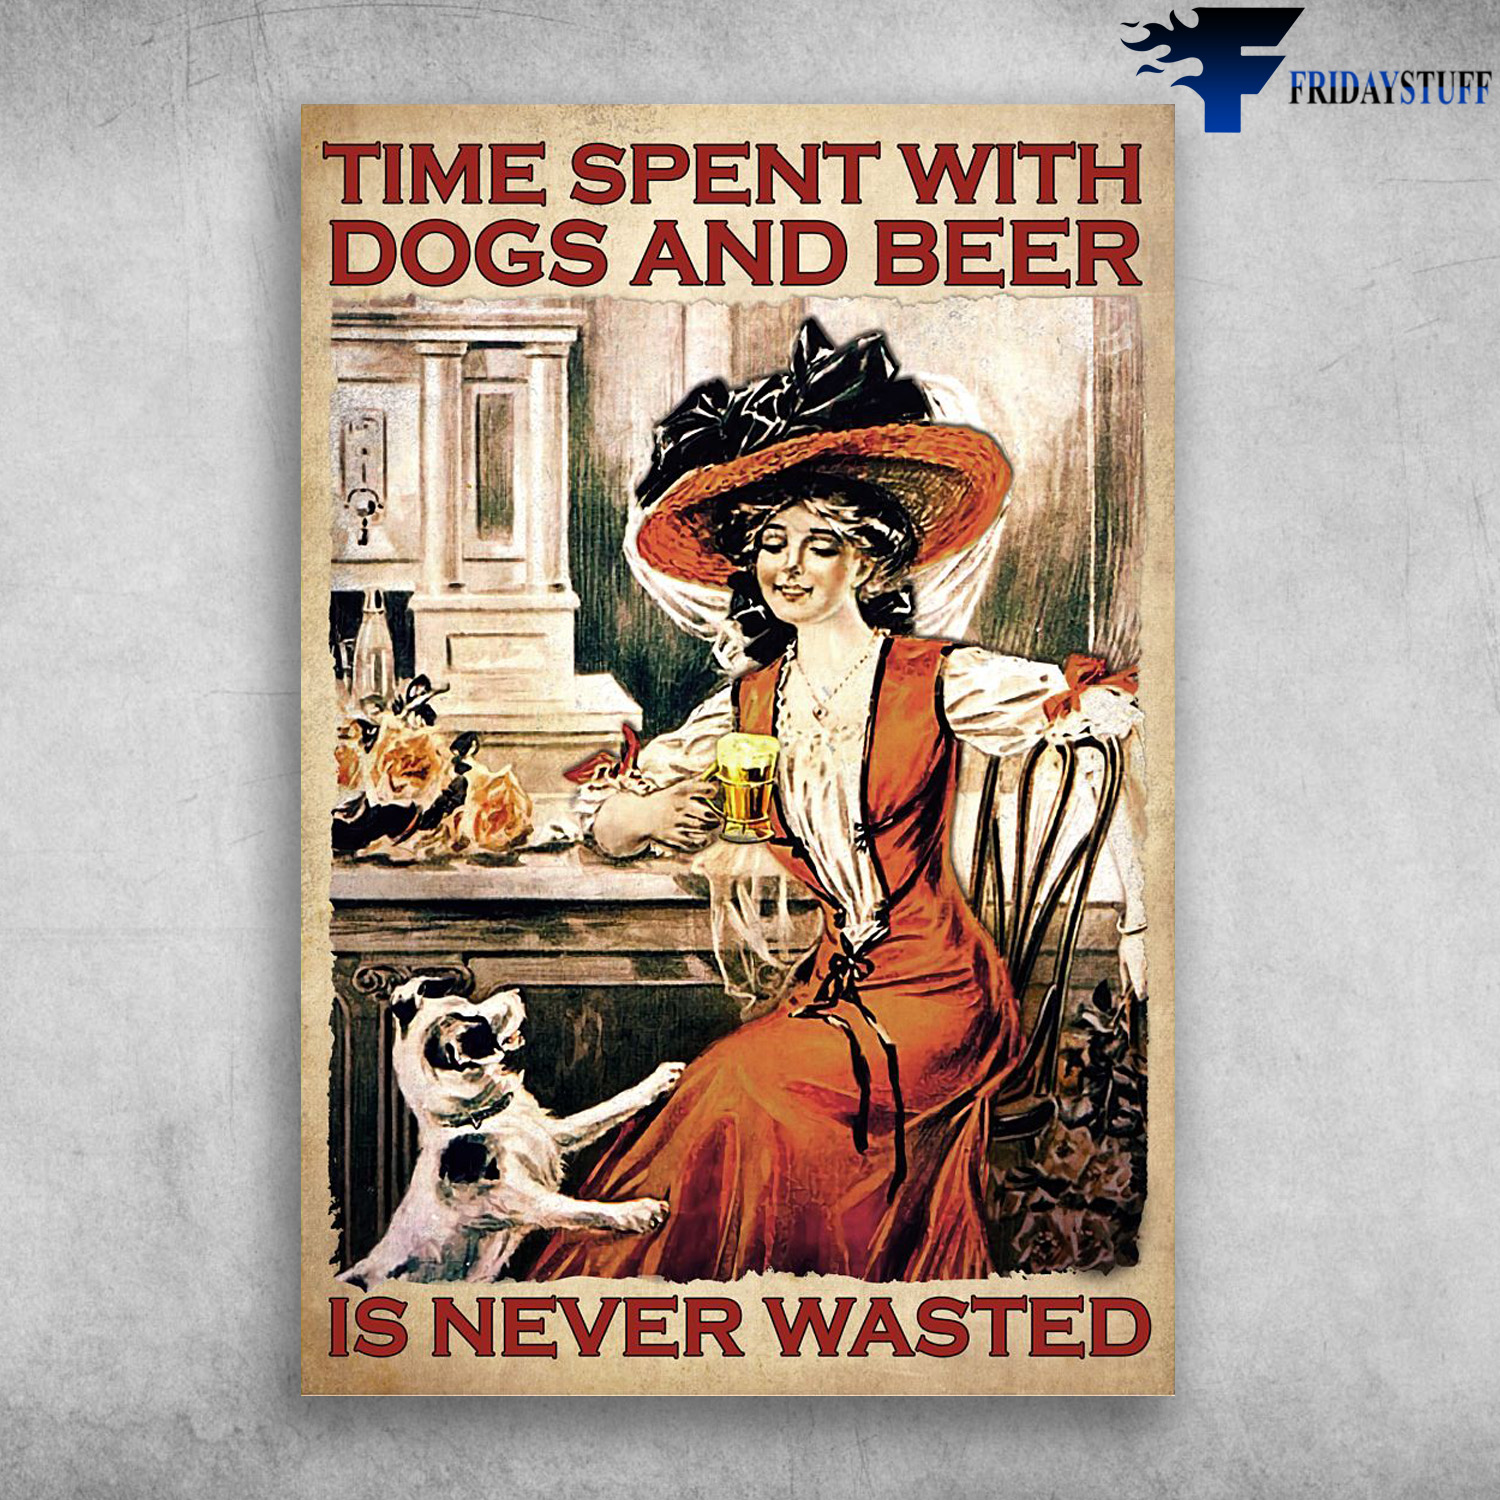 Girl Loves Dog And Wine - Time Spent With Dogs And Beer, Is Never Wasted